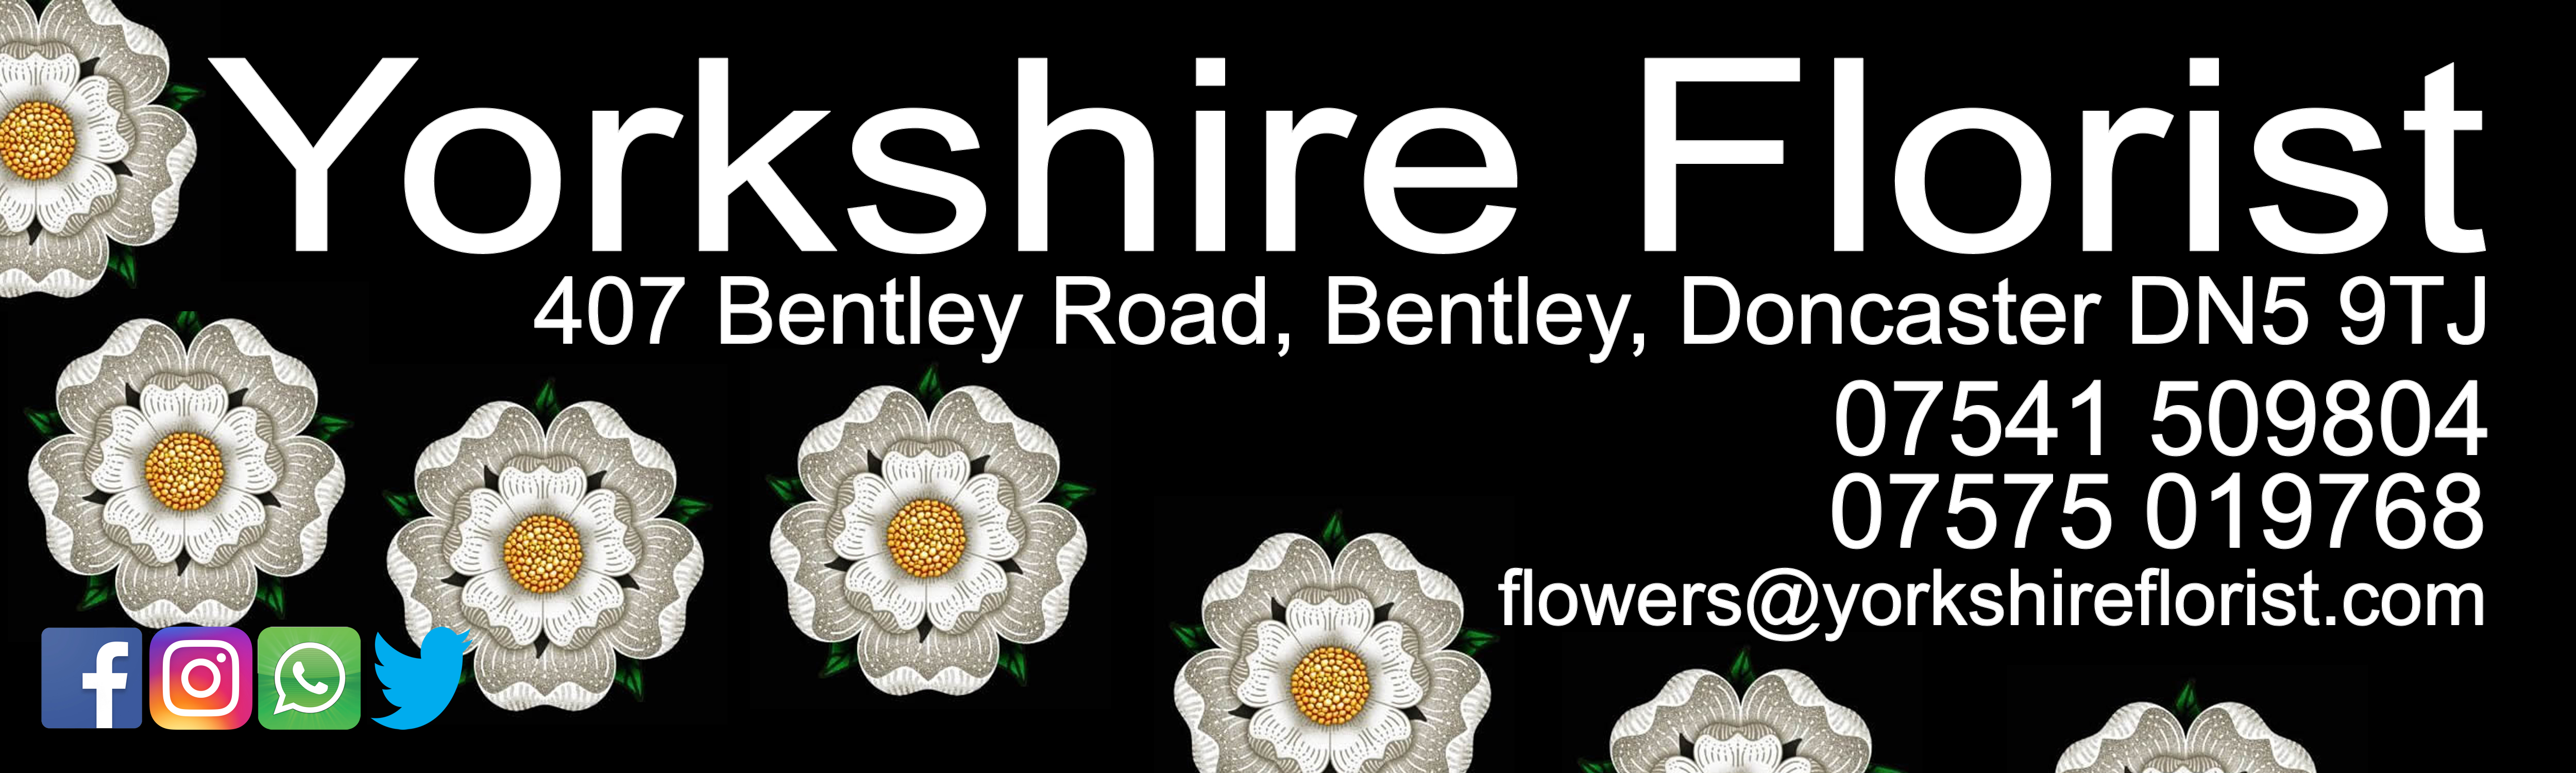 Yorkshire Florist flowers and gifts